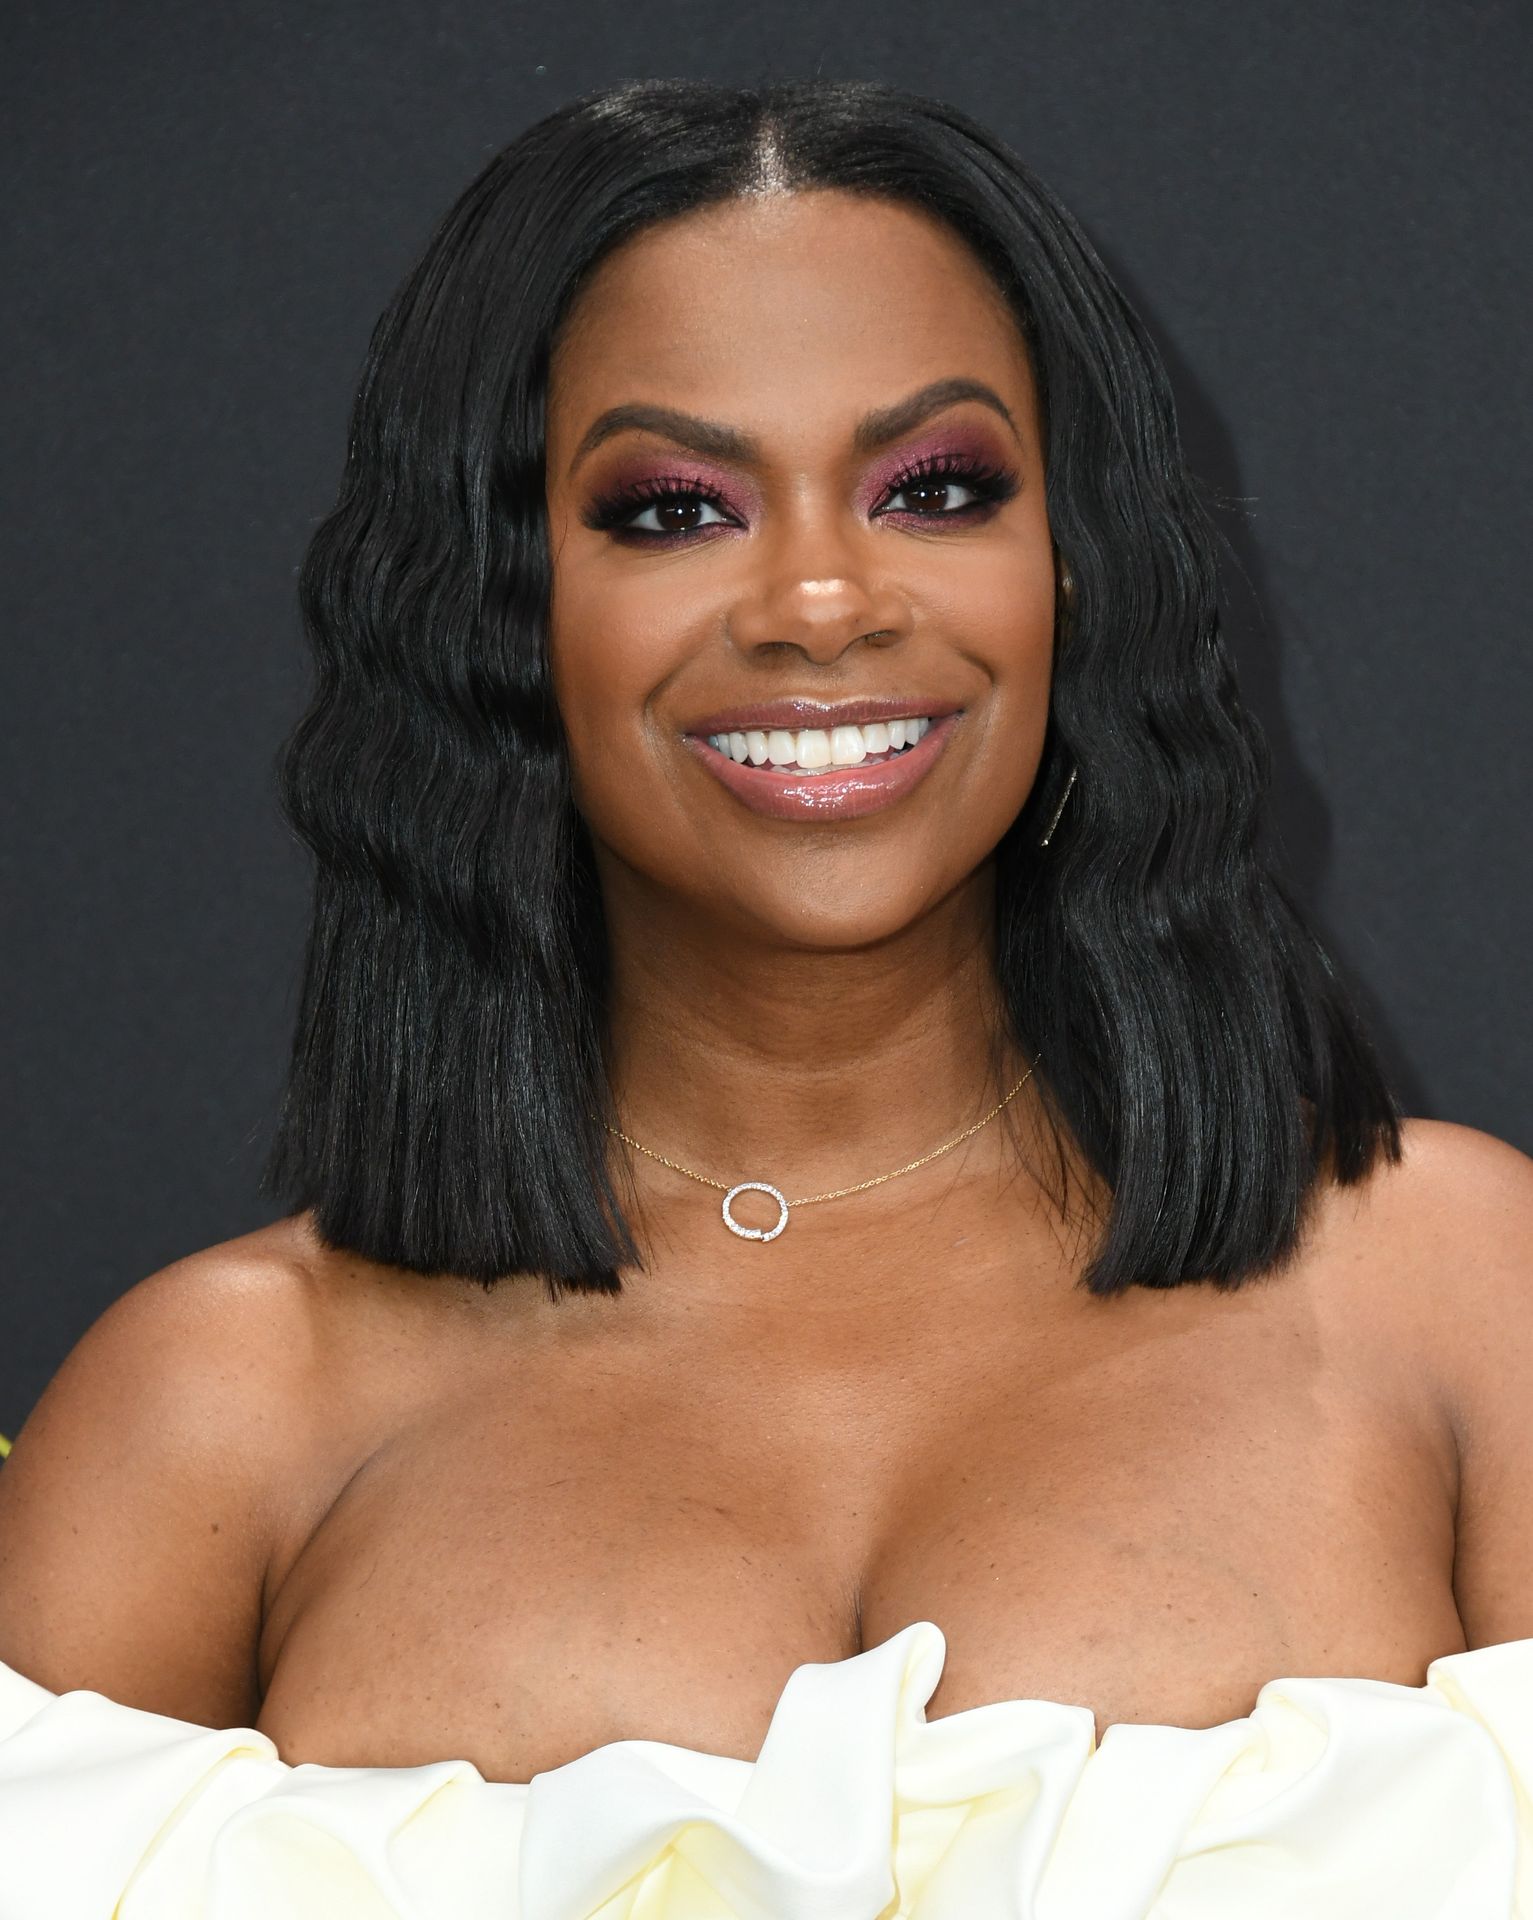 Best of Kandi burruss nude pictures